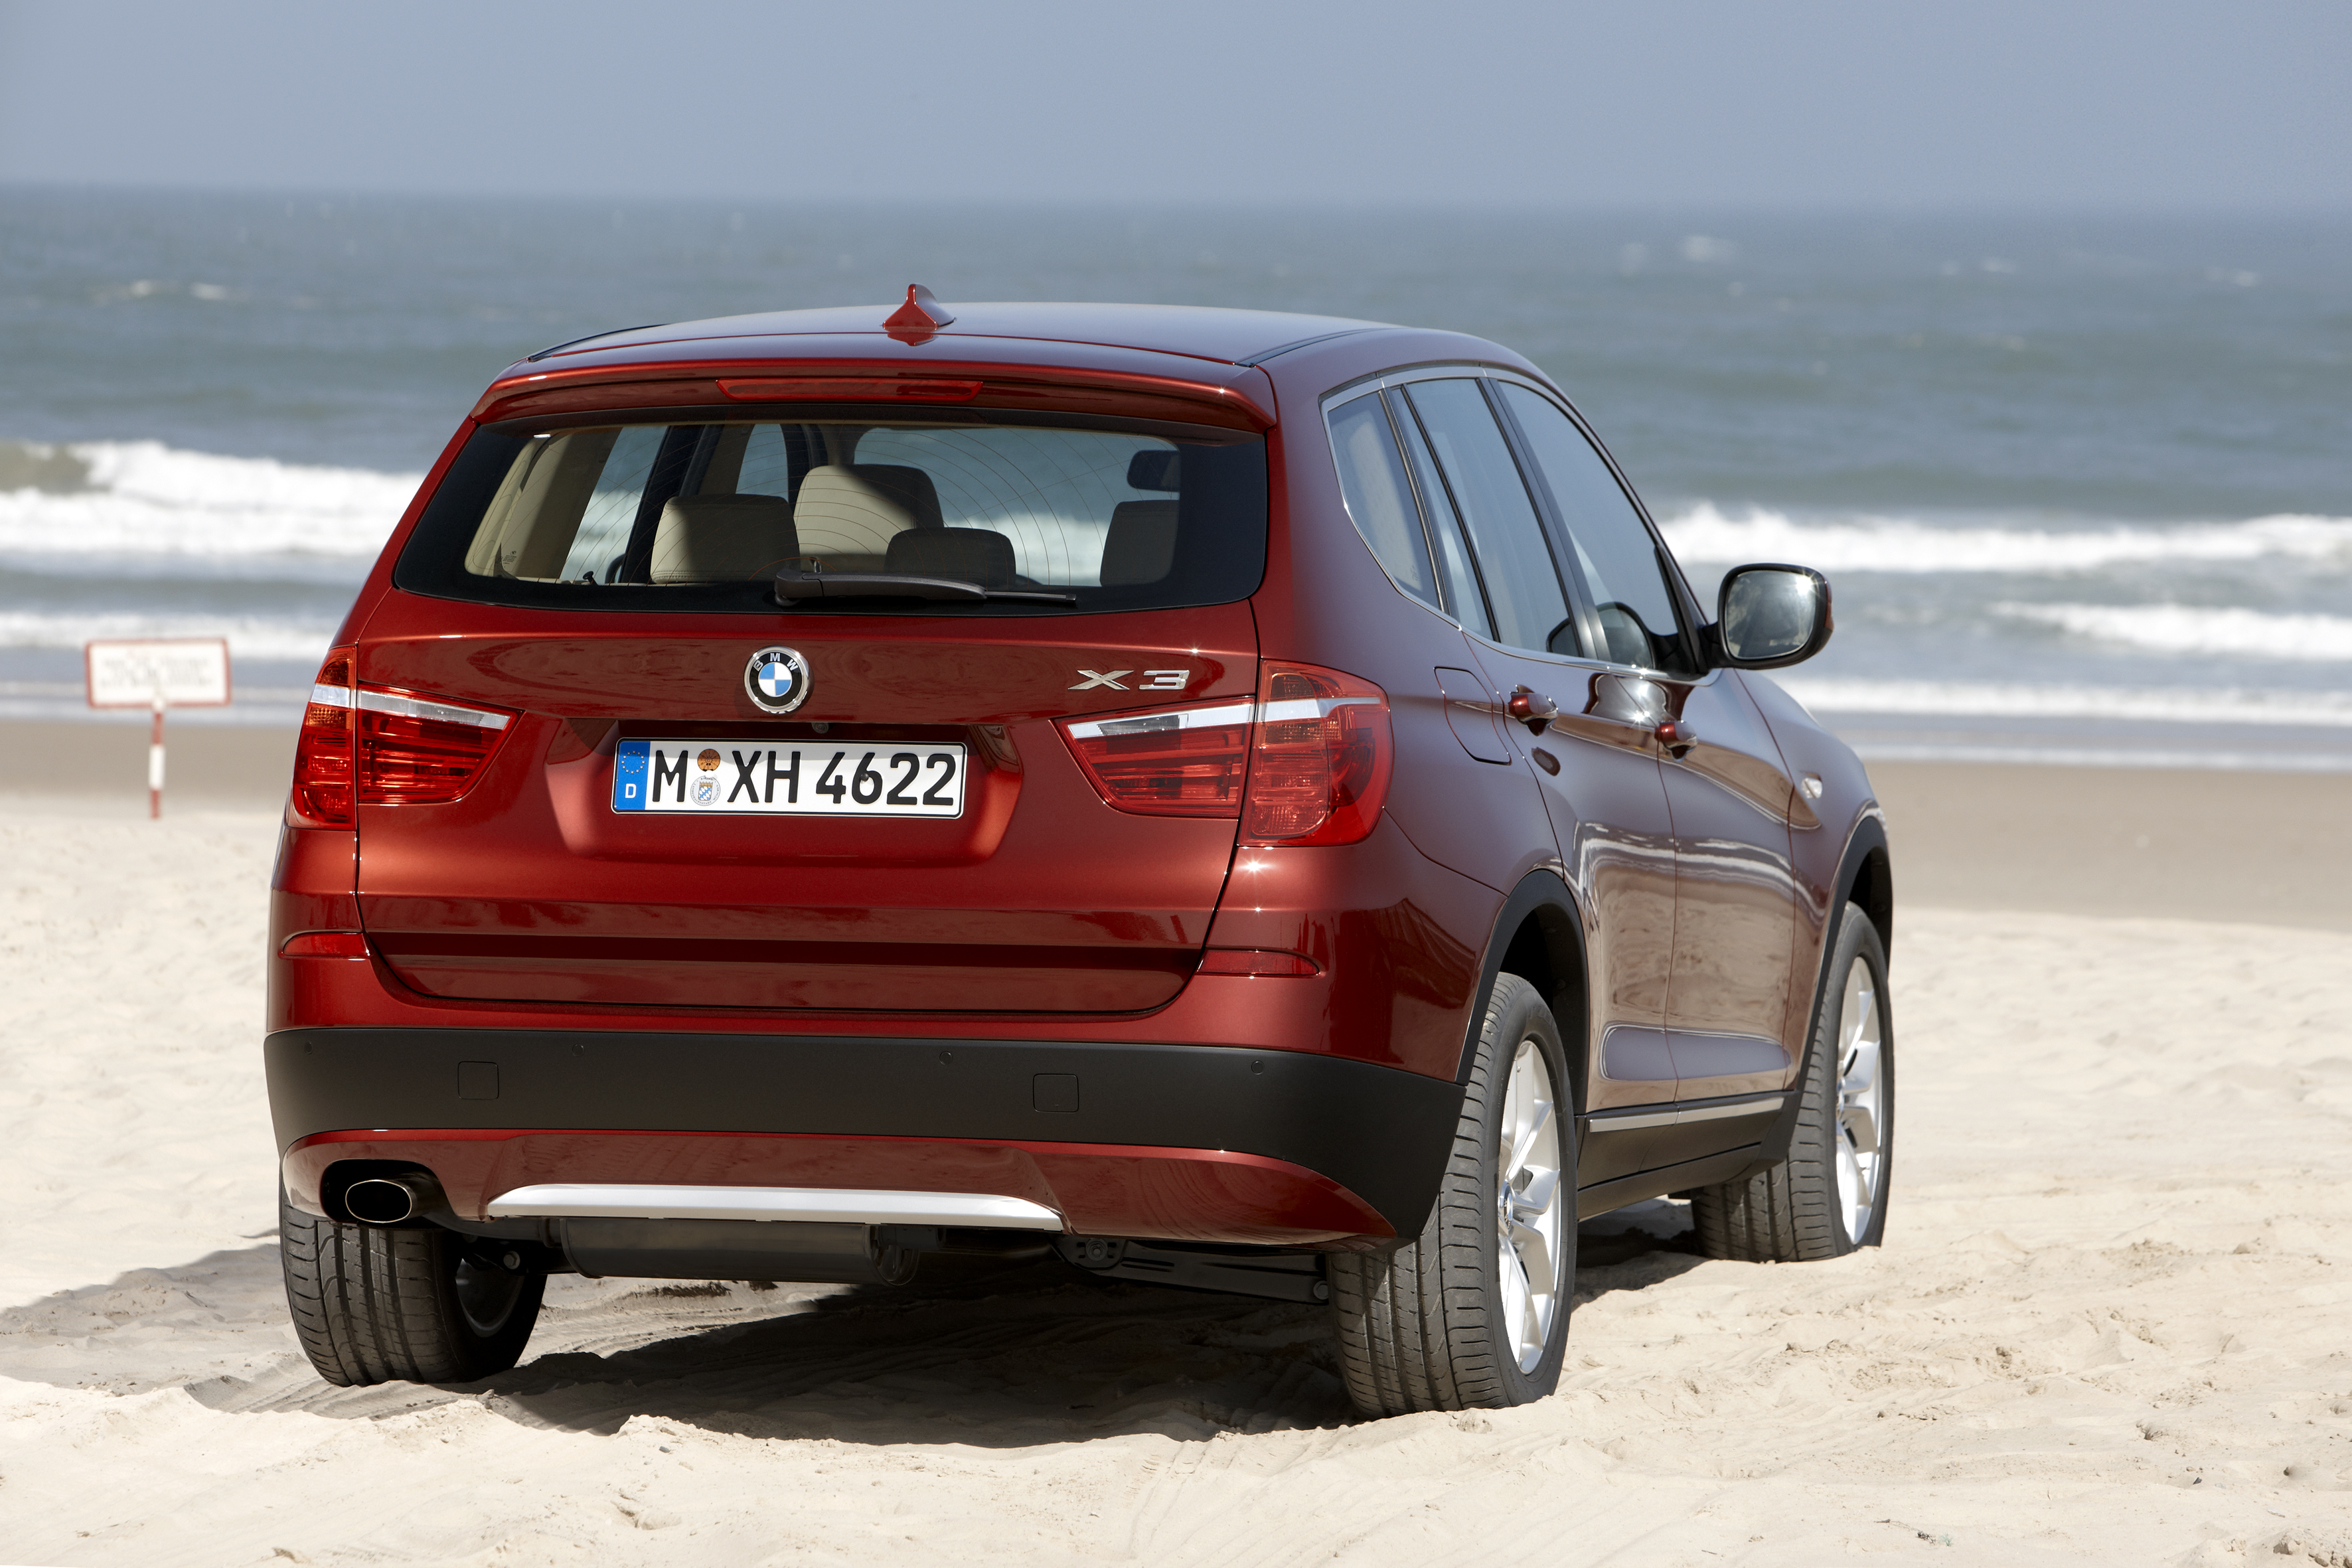 БМВ х3 f25. BMW x3 f25. BMW x3 кузов f25. BMW x3 f25 Red.